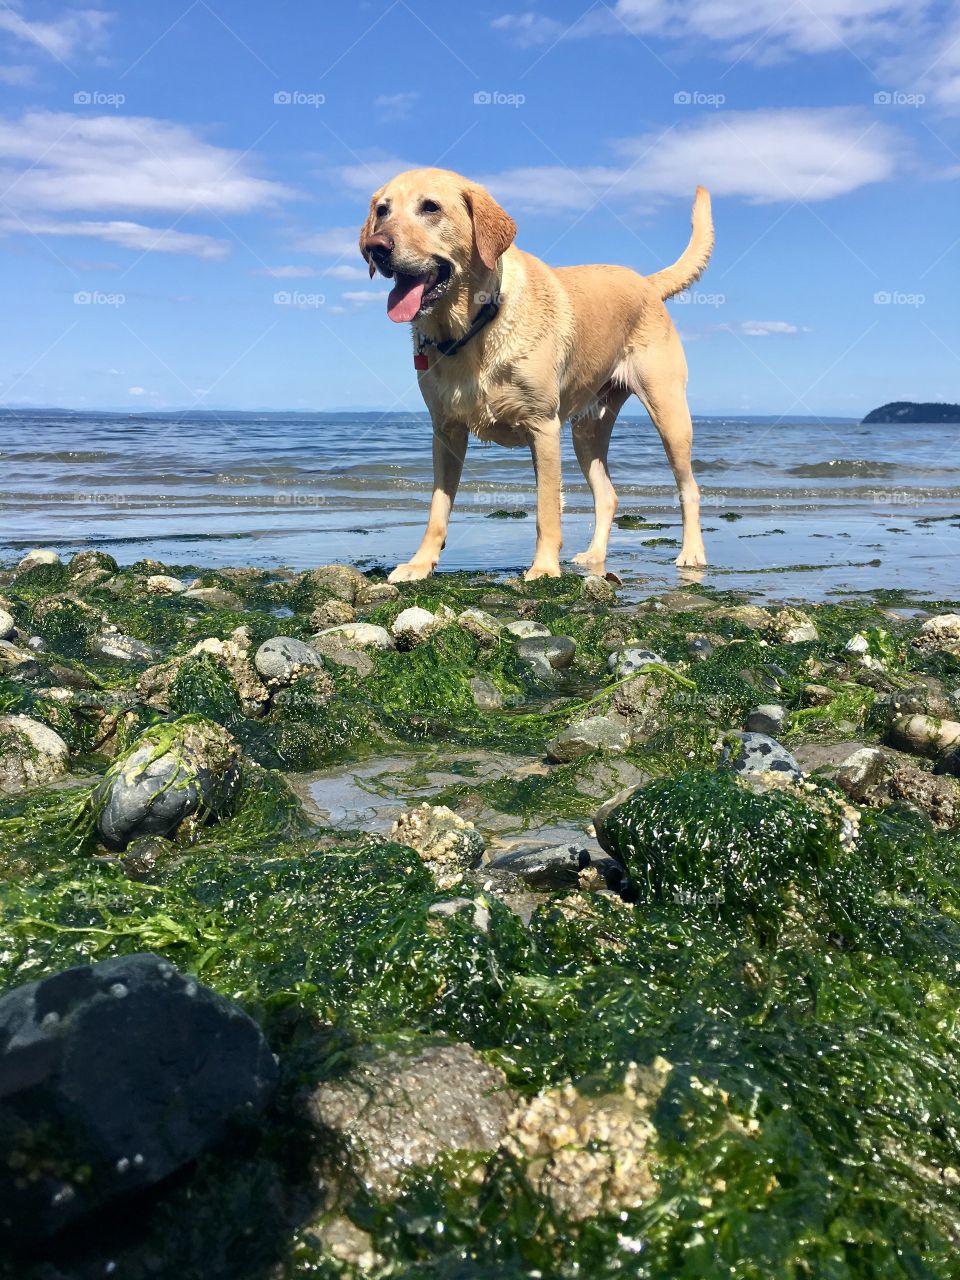 Yellow lab in water
